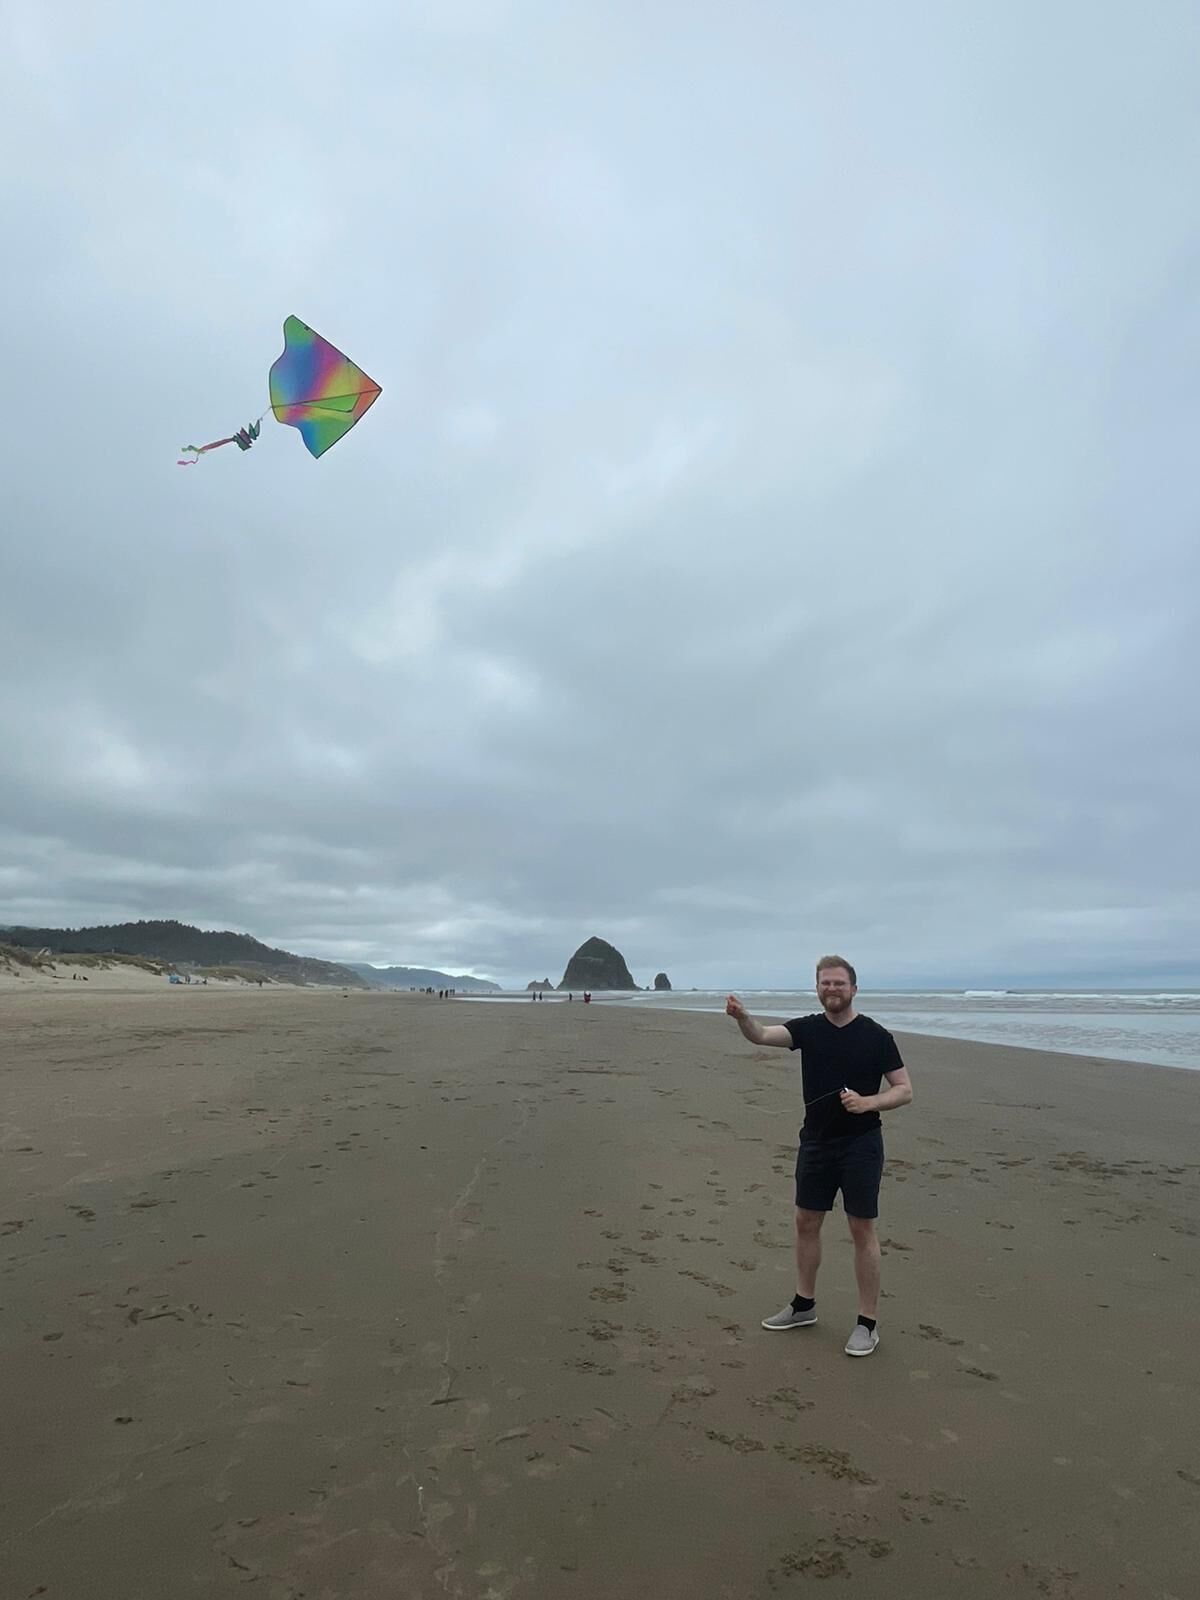 Perfect weather to fly a kite.